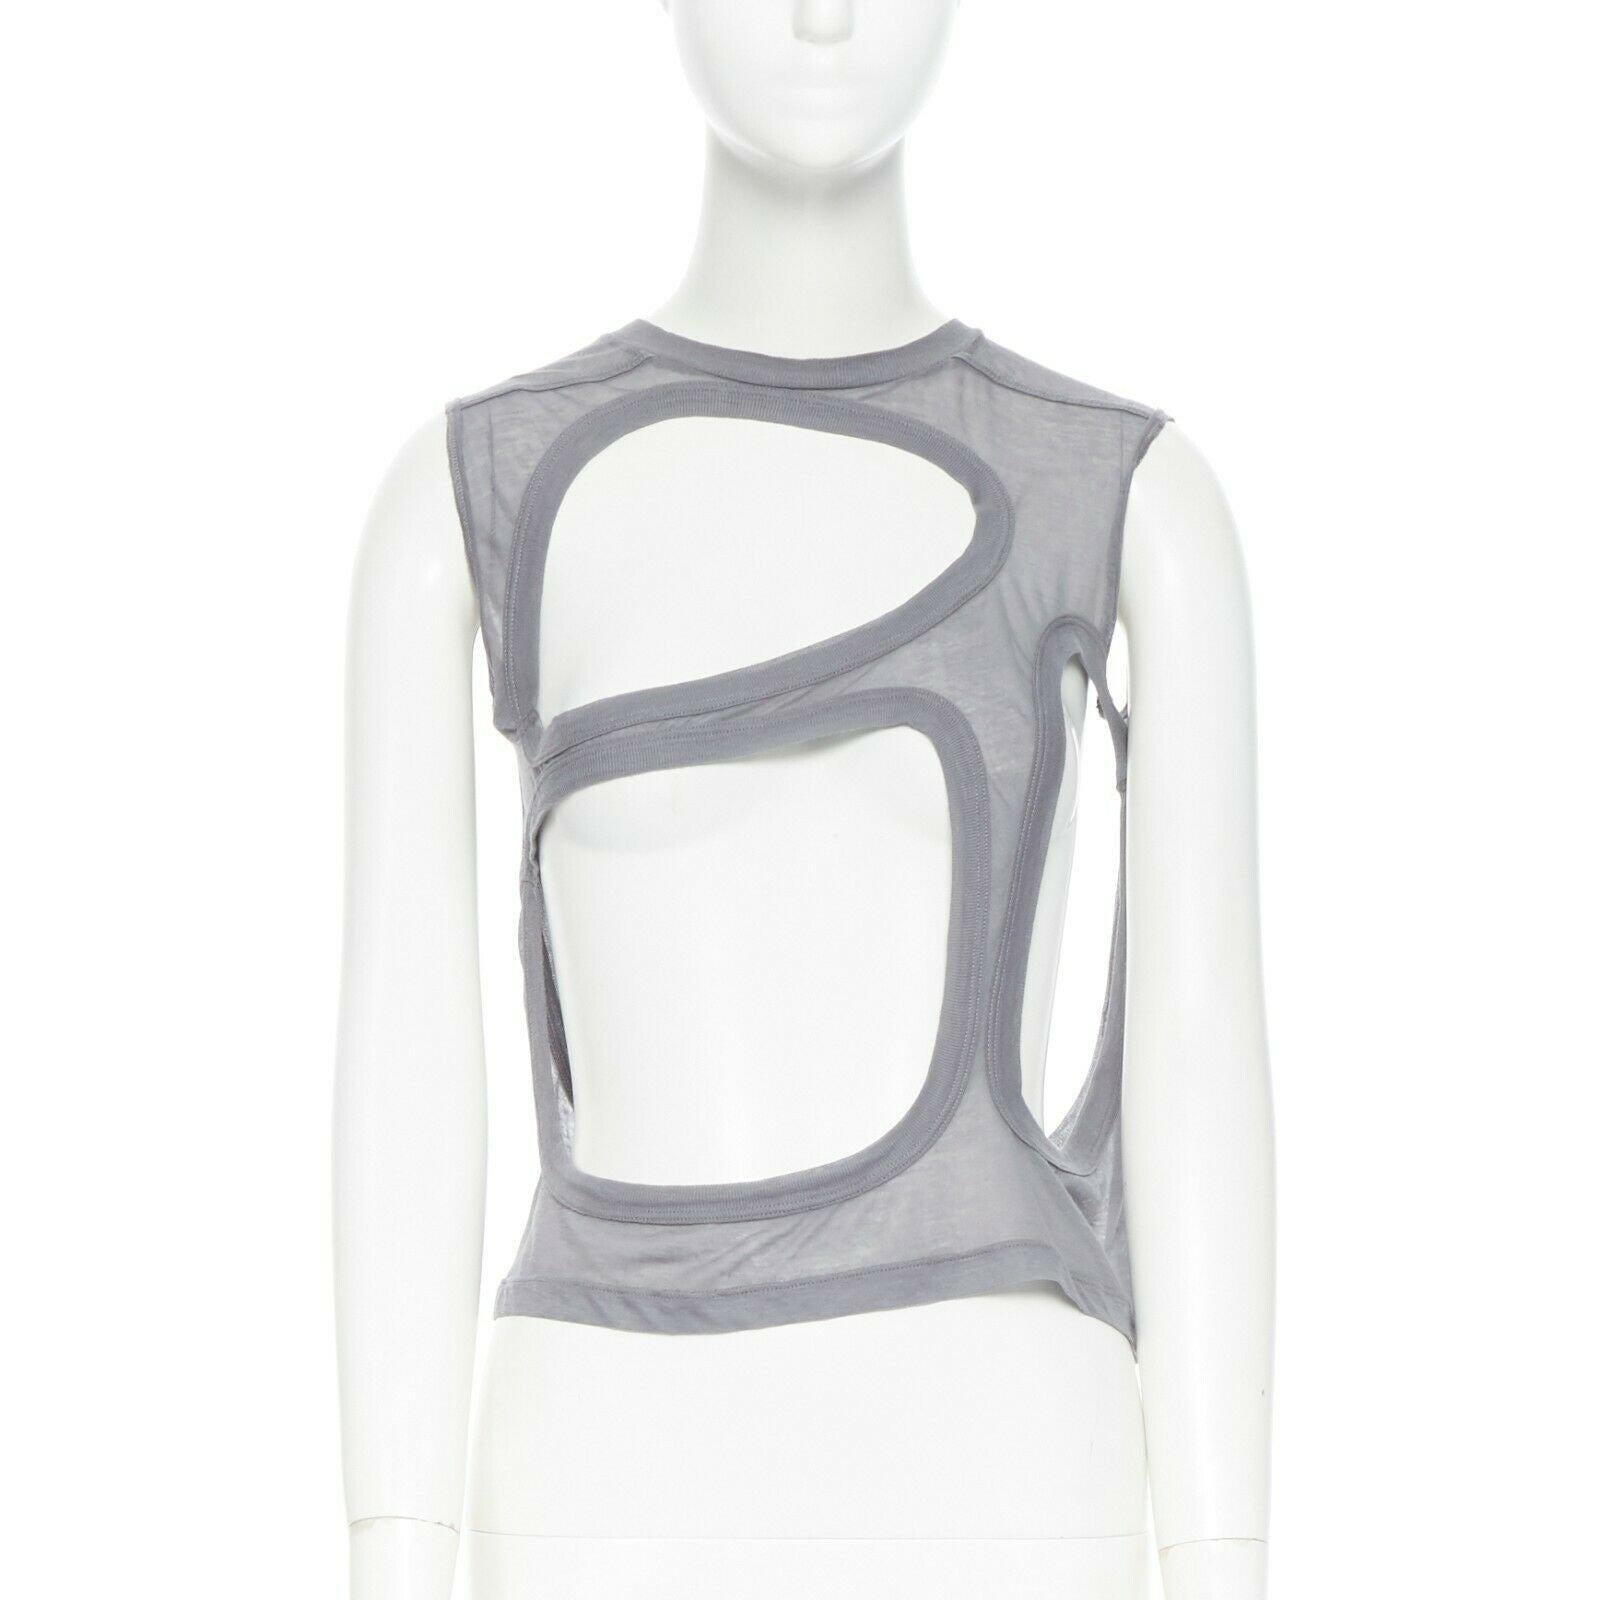 new RICK OWENS SS18 Dirt Membrane grey cotton holey cut out tank top IT42 M
Brand: Rick Owens
Designer: Rick Owens
Collection: Spring Summer 2018
Model Name / Style: Membrane top
Material: Cotton
Color: Grey
Pattern: Solid
Extra Detail: Membrane